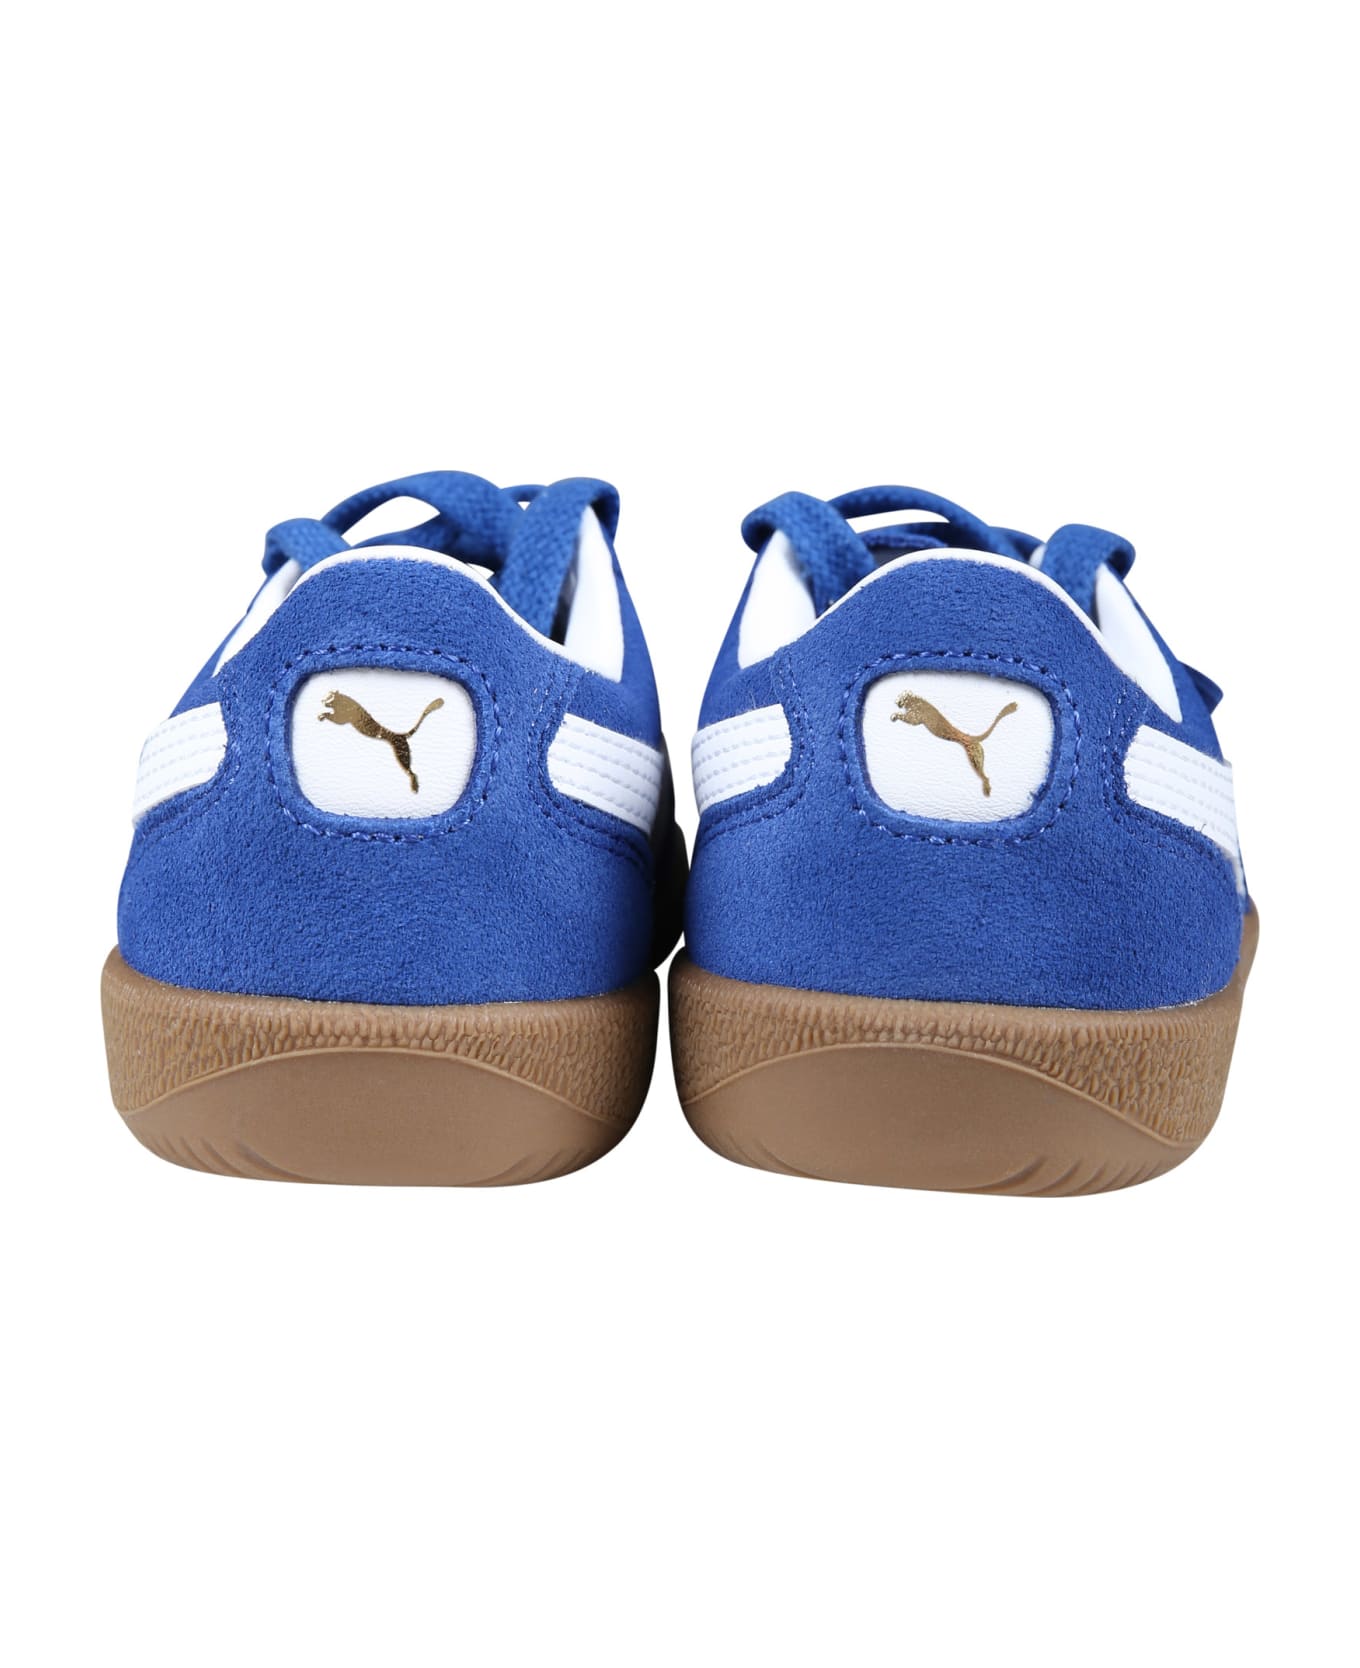 Puma Palermo Ps Light Blue Low Sneakers For Kids - Light Blue